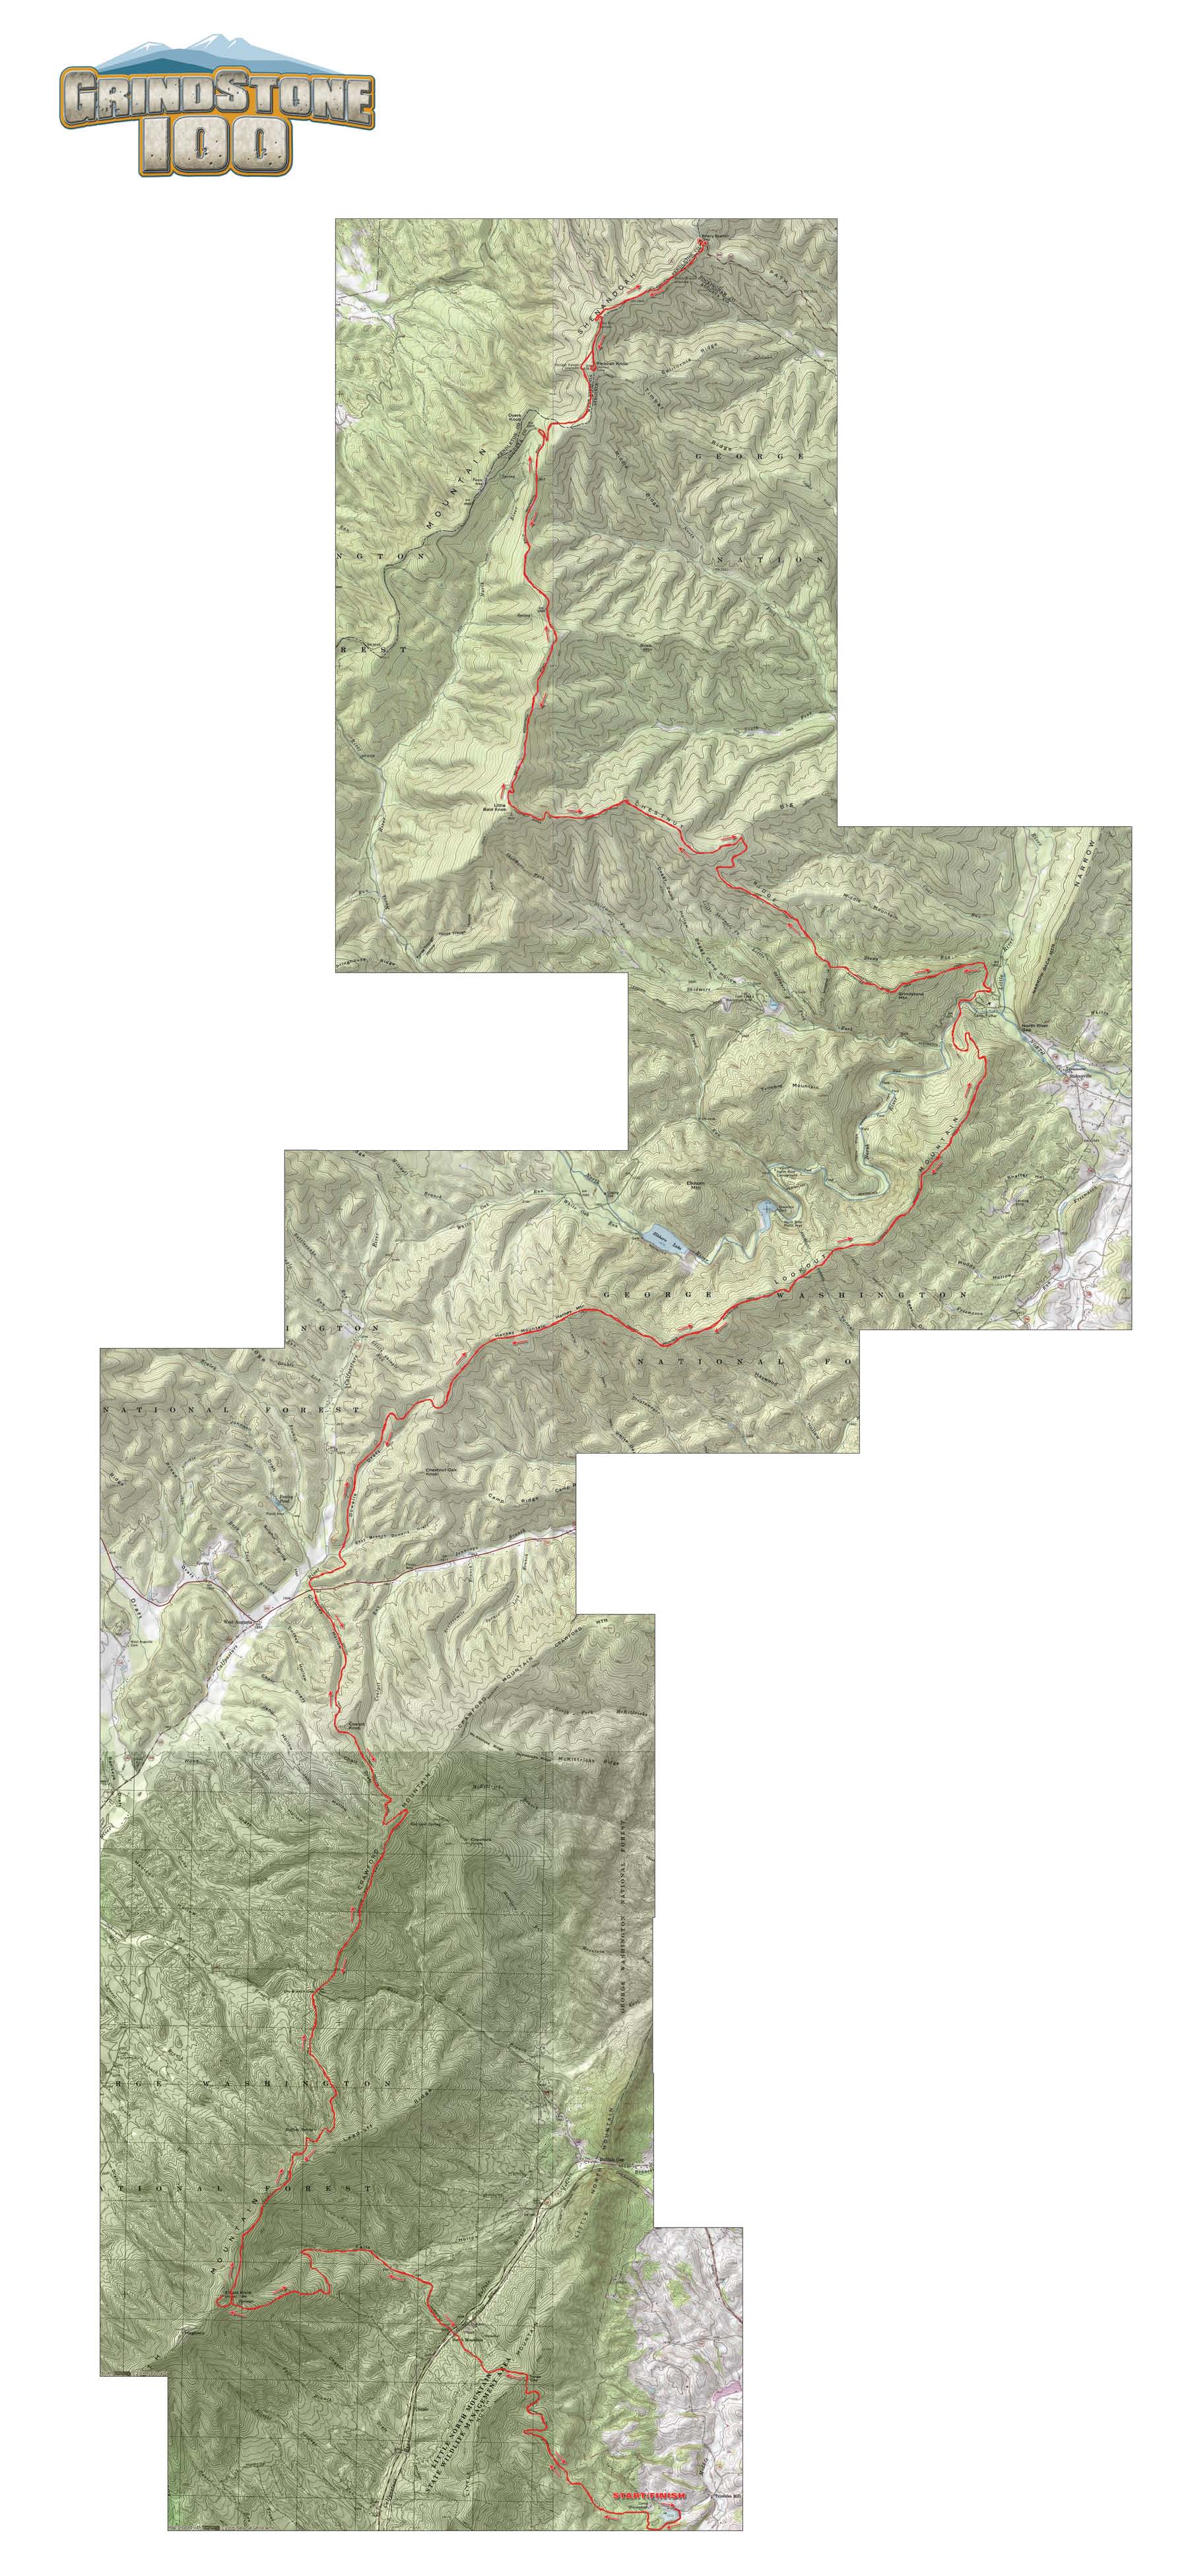 Grindstone Course Map